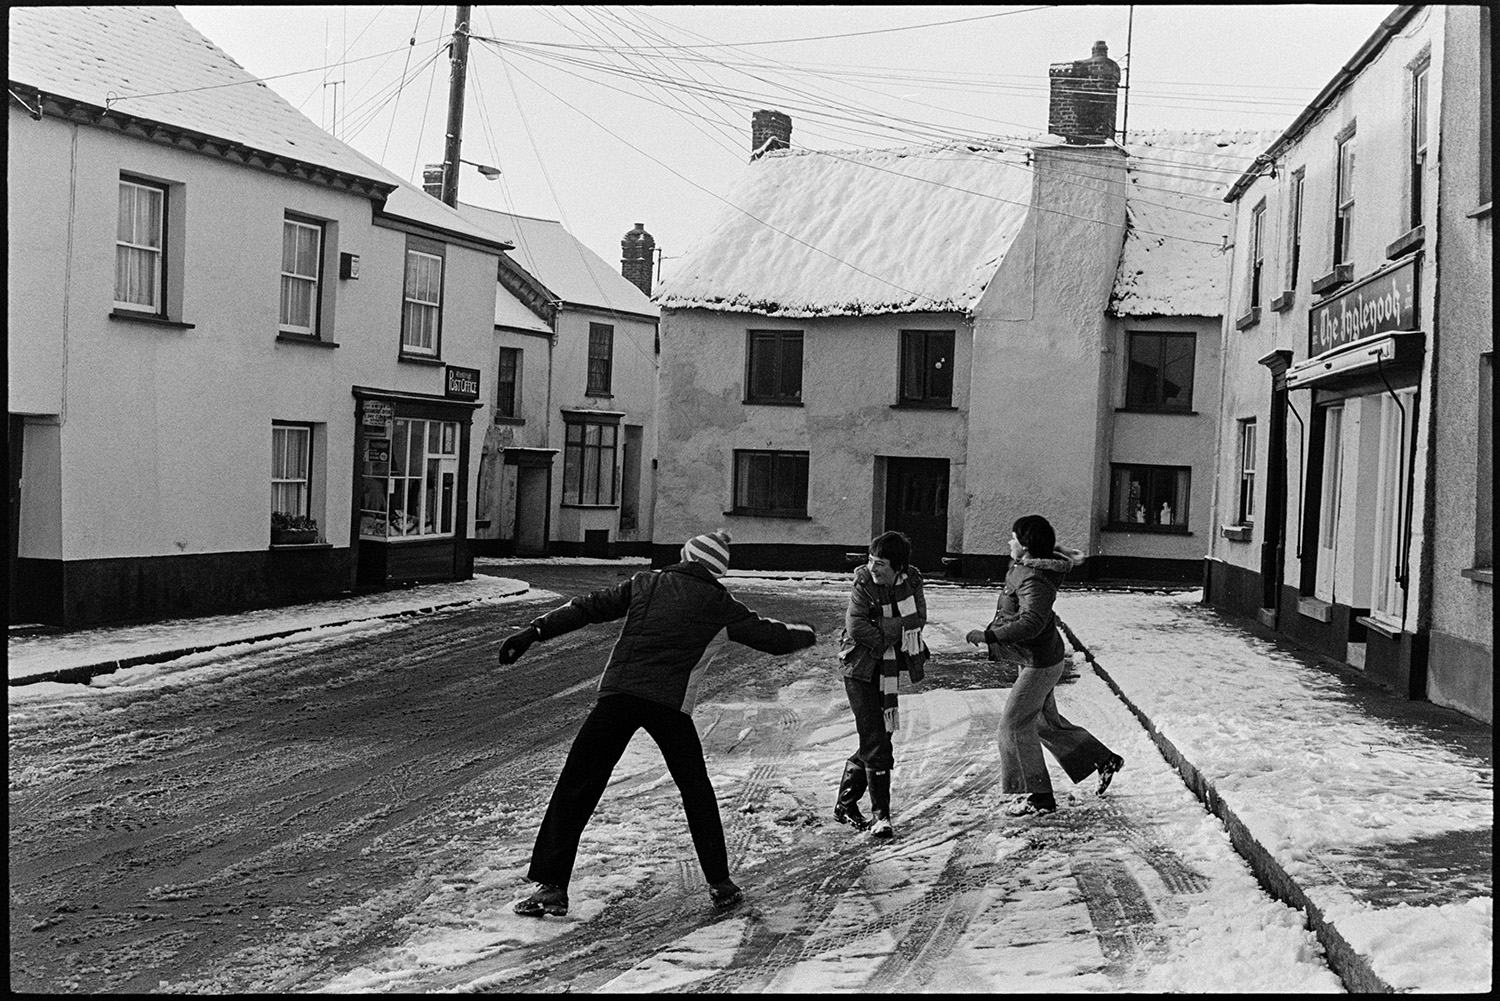 Children throwing snowballs in snowy village square. 
[Three children throwing snowballs in a snow covered street in Winkleigh. The Winkleigh Post Office is visible further down the street.]